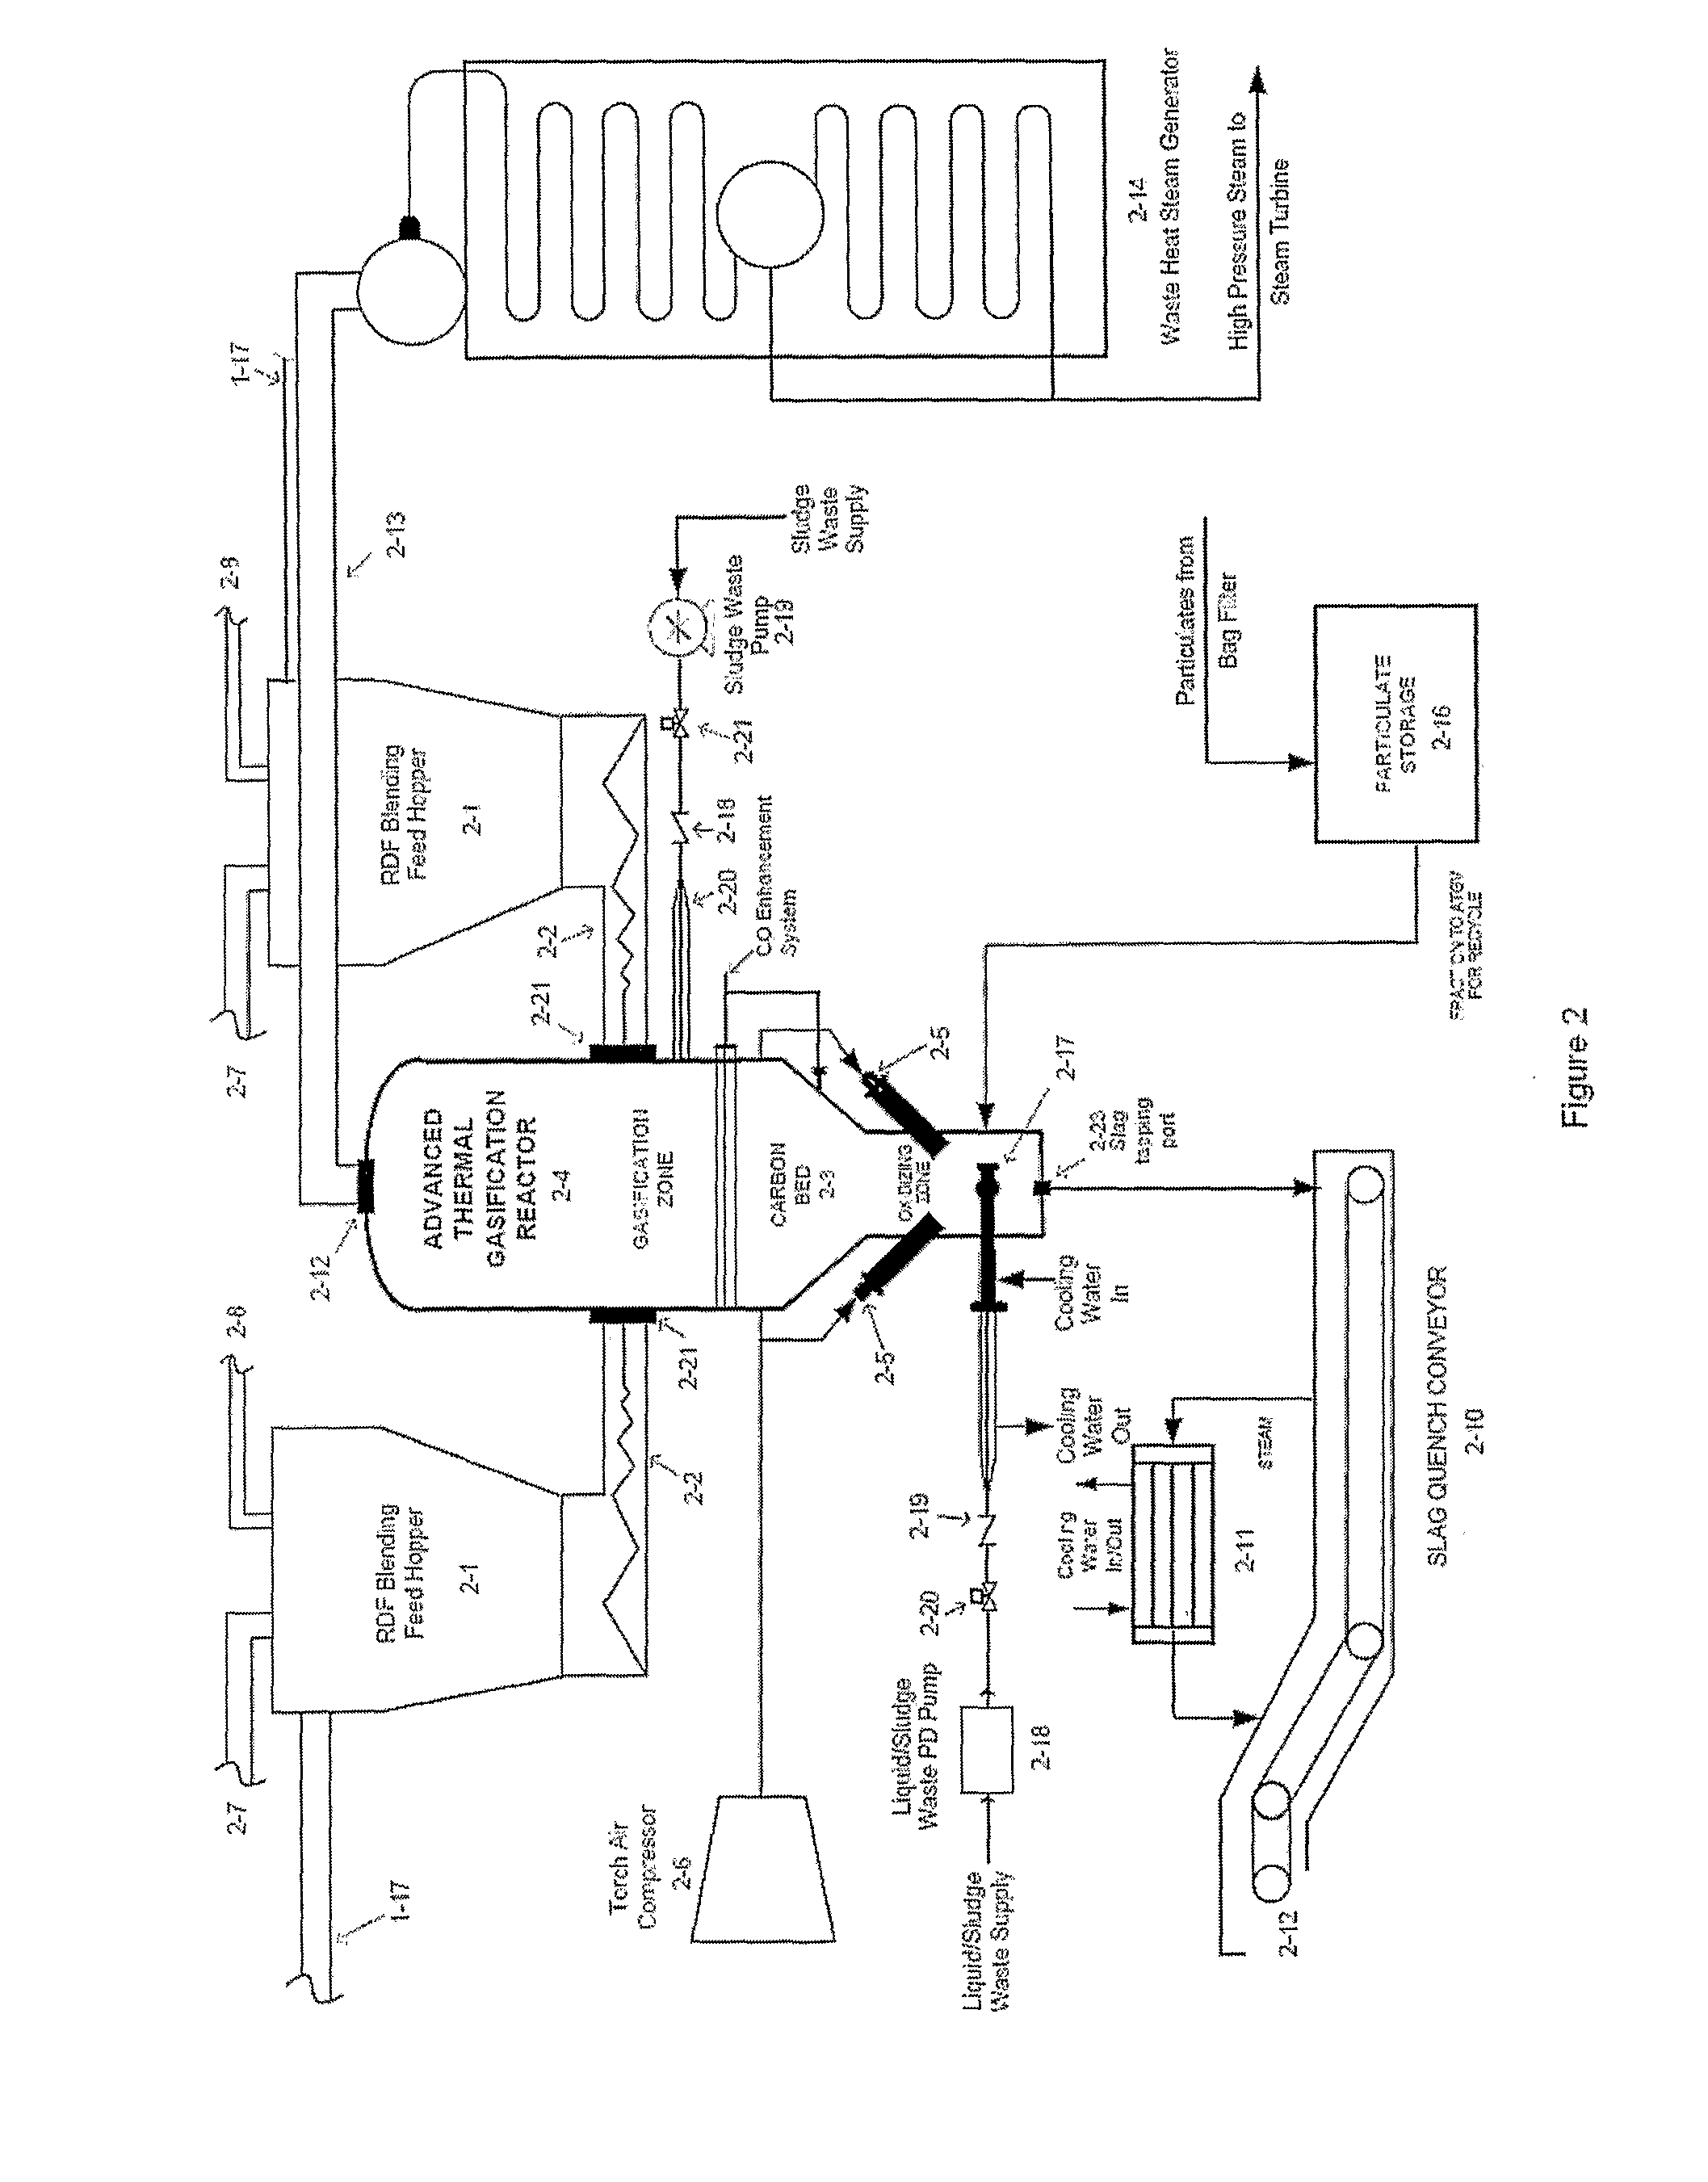 Method and system for producing energy from waste